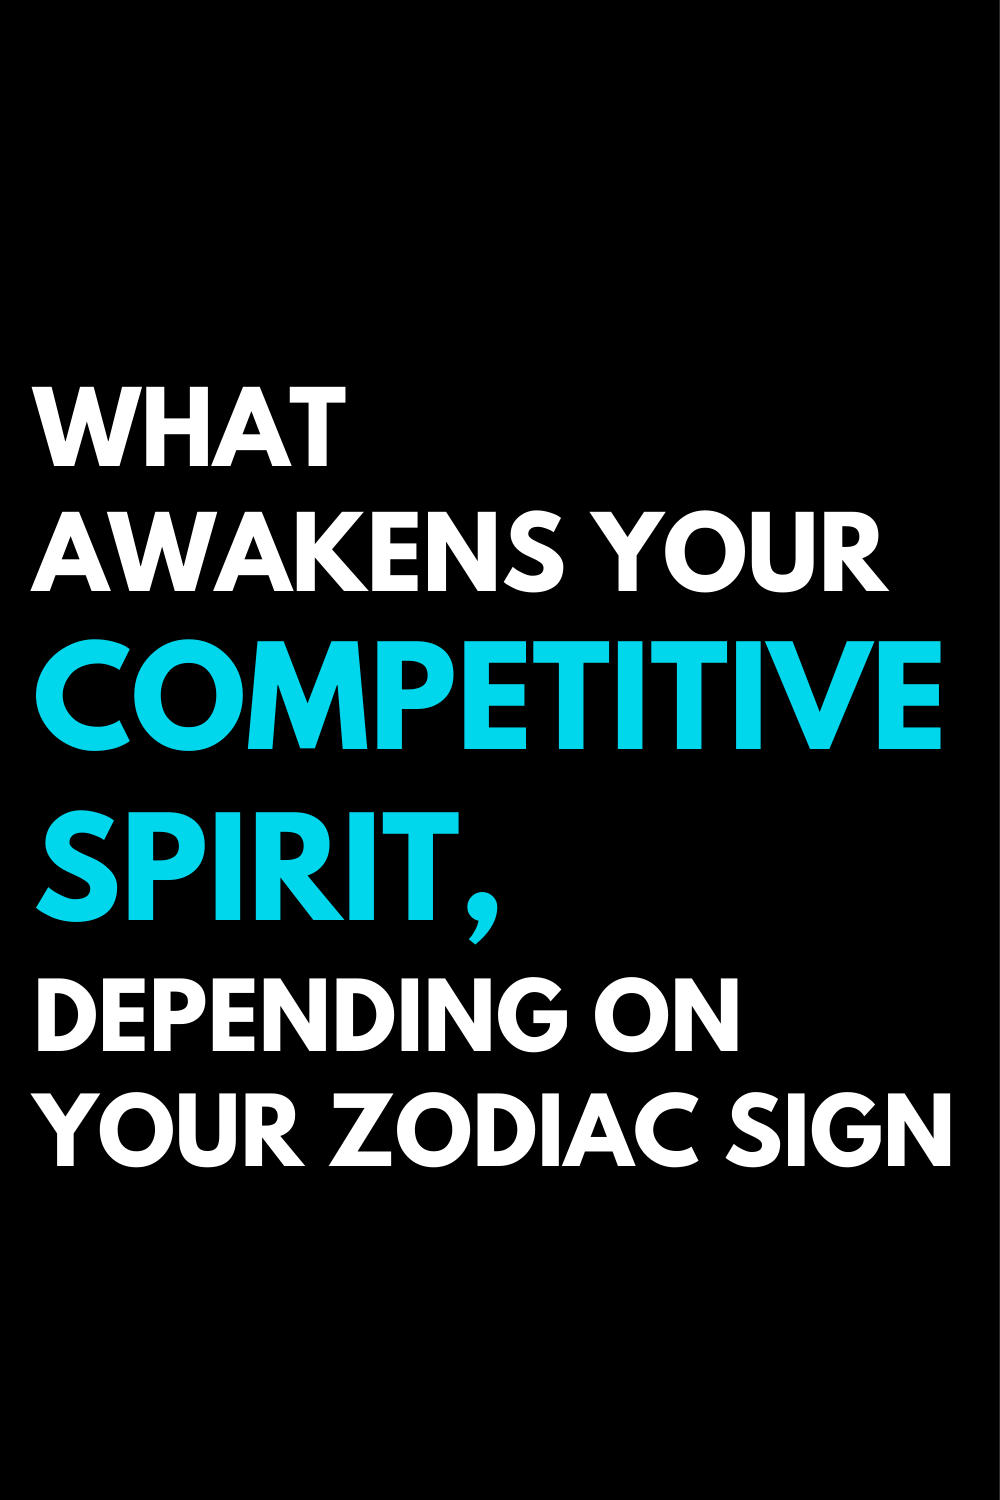 What awakens your competitive spirit, depending on your zodiac sign